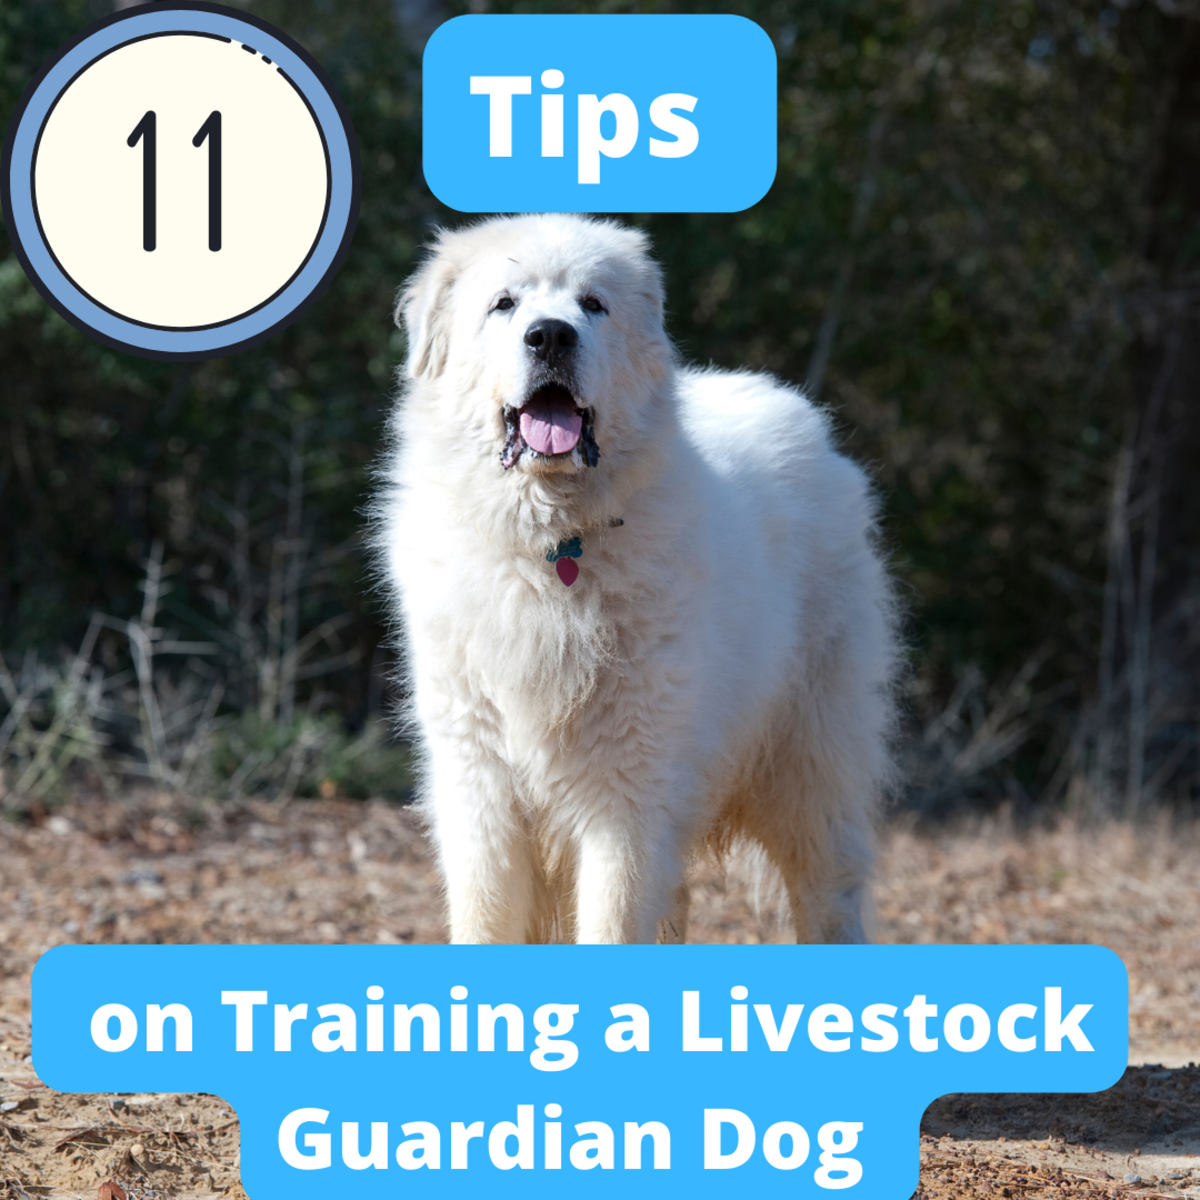 11 Tips for Training Livestock Guardian Dogs